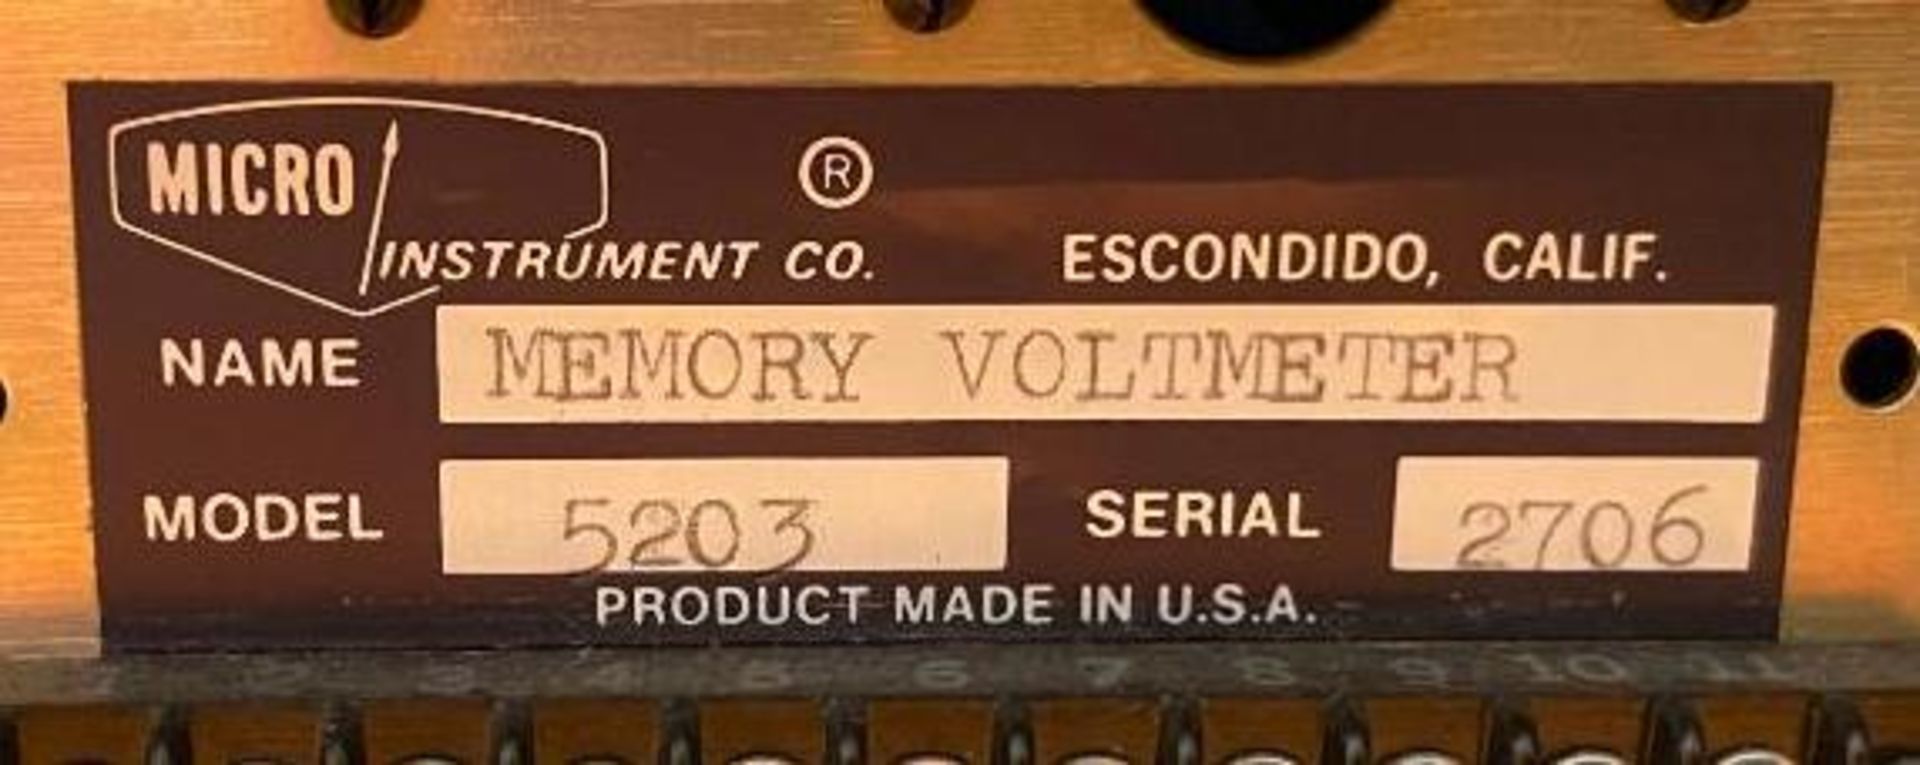 MEMORY VOLTMETER TO RECORD AC OR DC VOLTAGES BRAND/MODEL: MICRO INSTRUMENT COL. 5203 INFORMATION: GA - Image 4 of 4